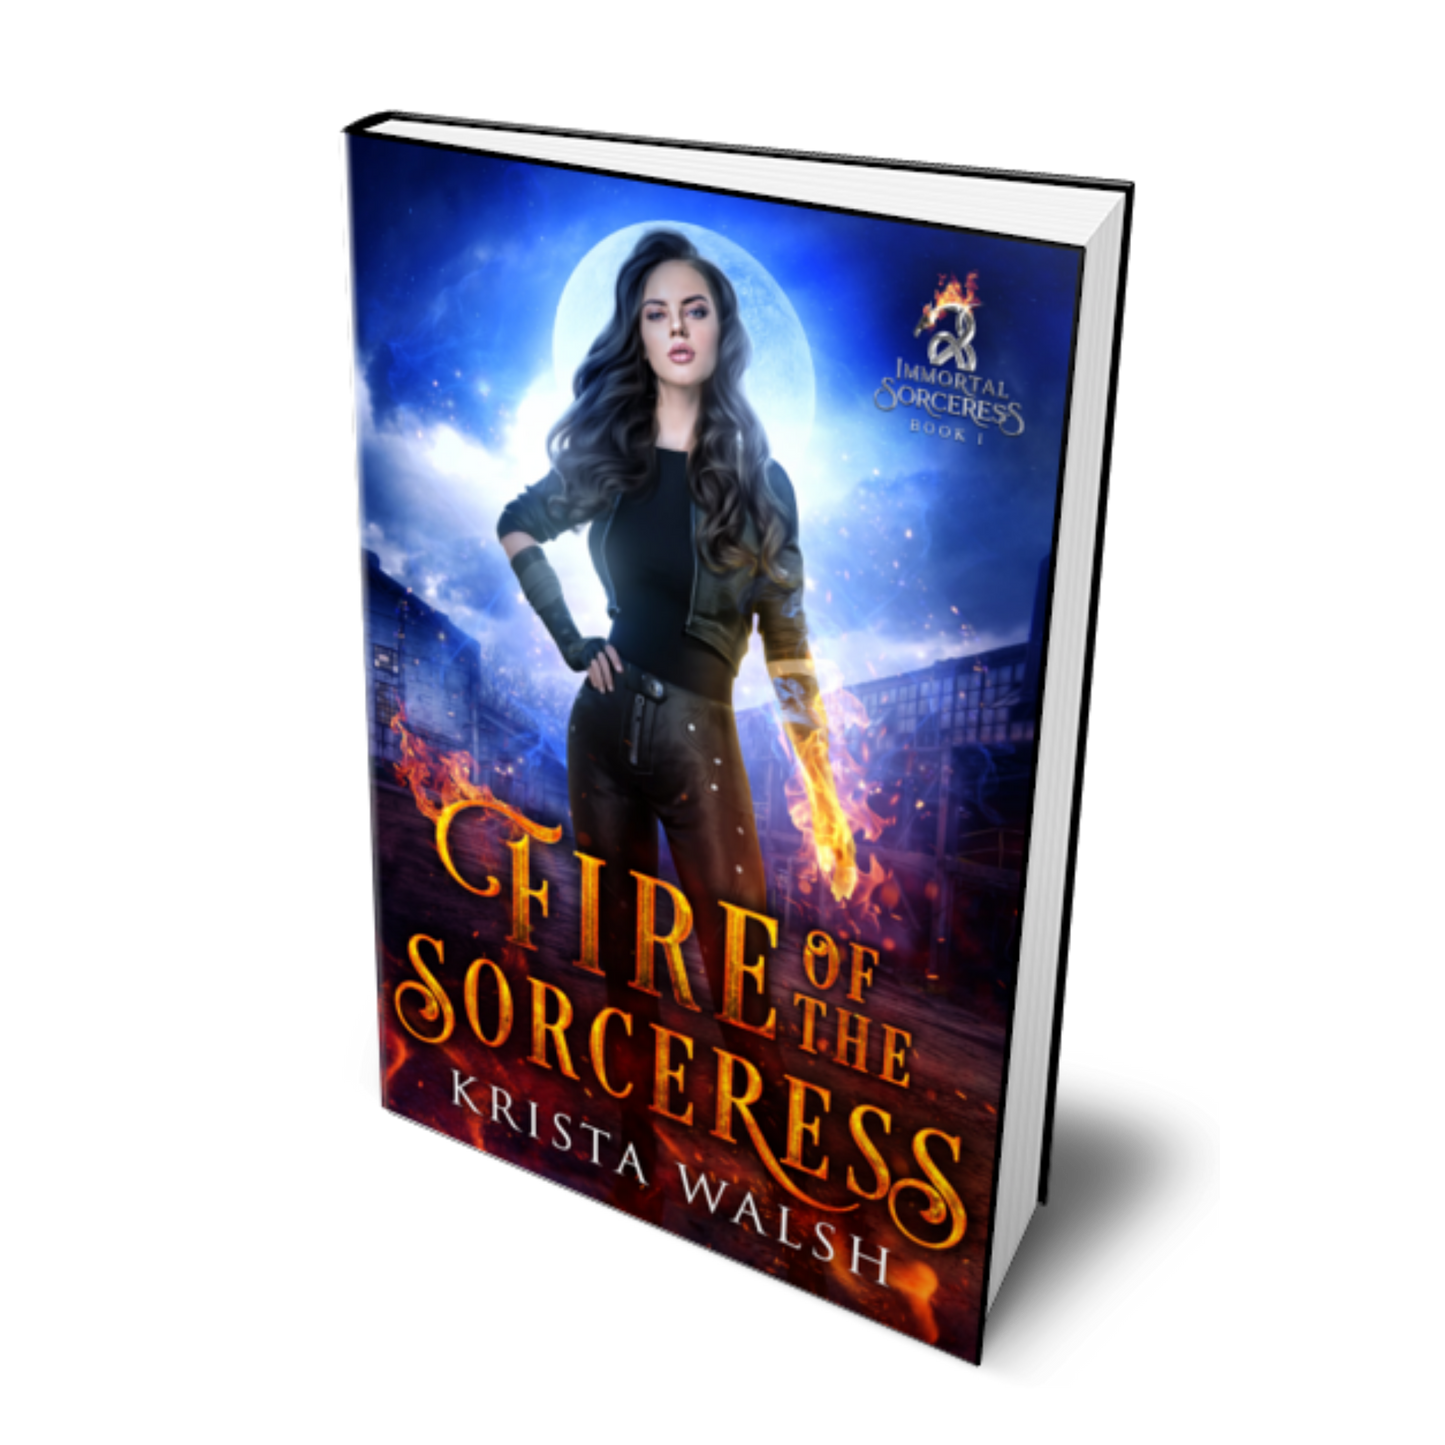 Fire of the Sorceress - SIGNED (Limited Time)